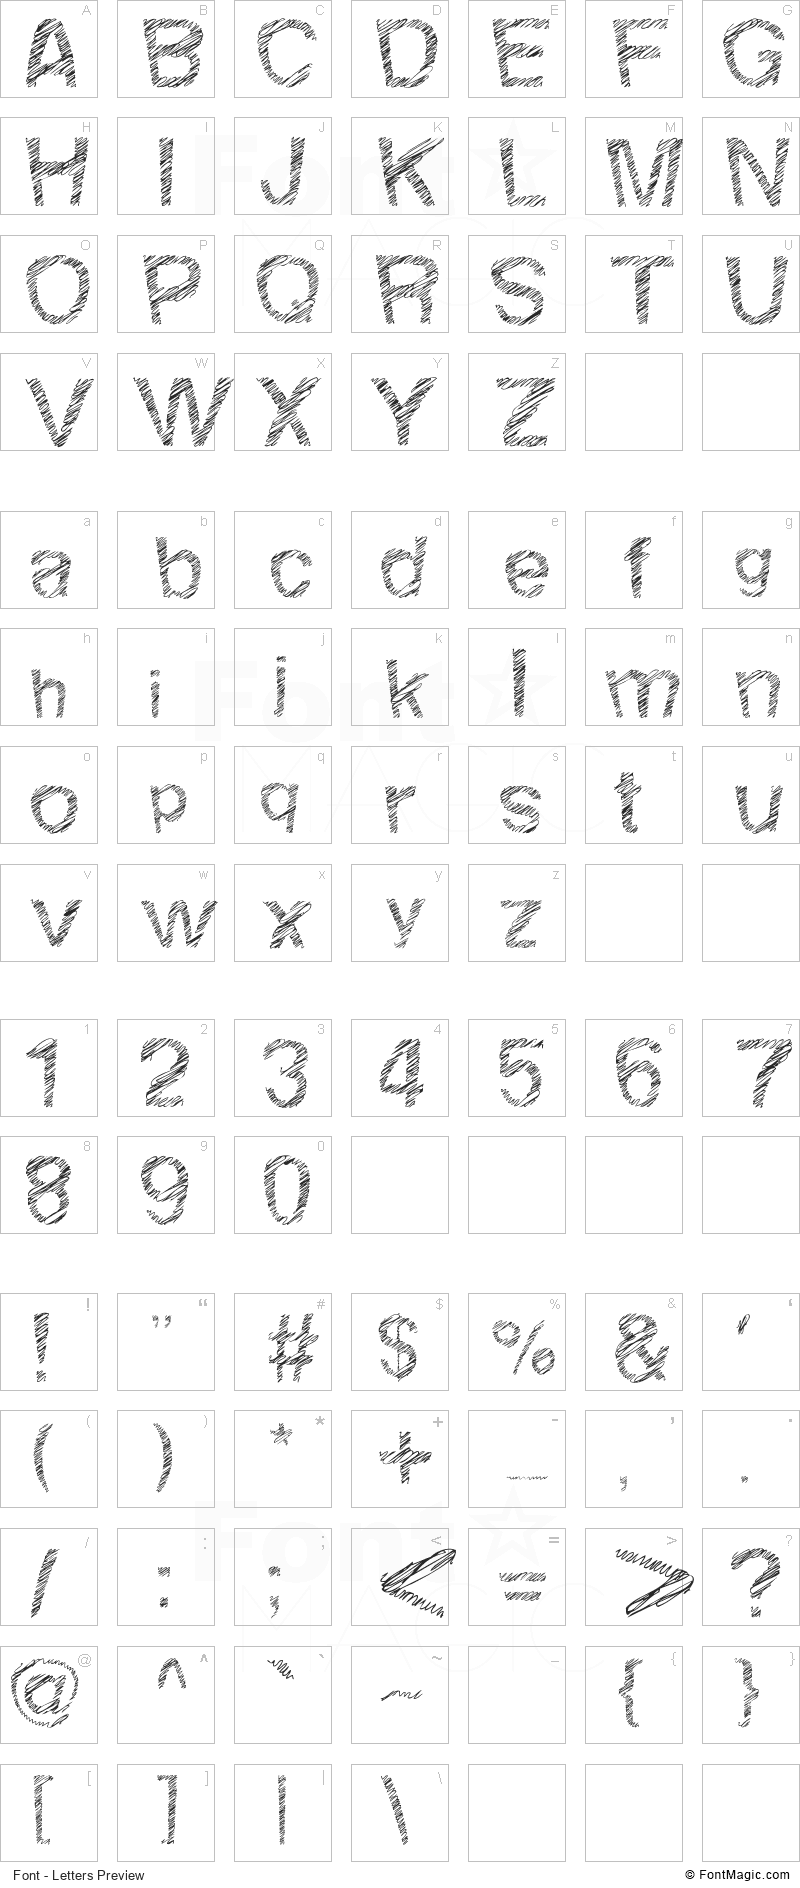 Woodcutter Fine Scketch Font - All Latters Preview Chart